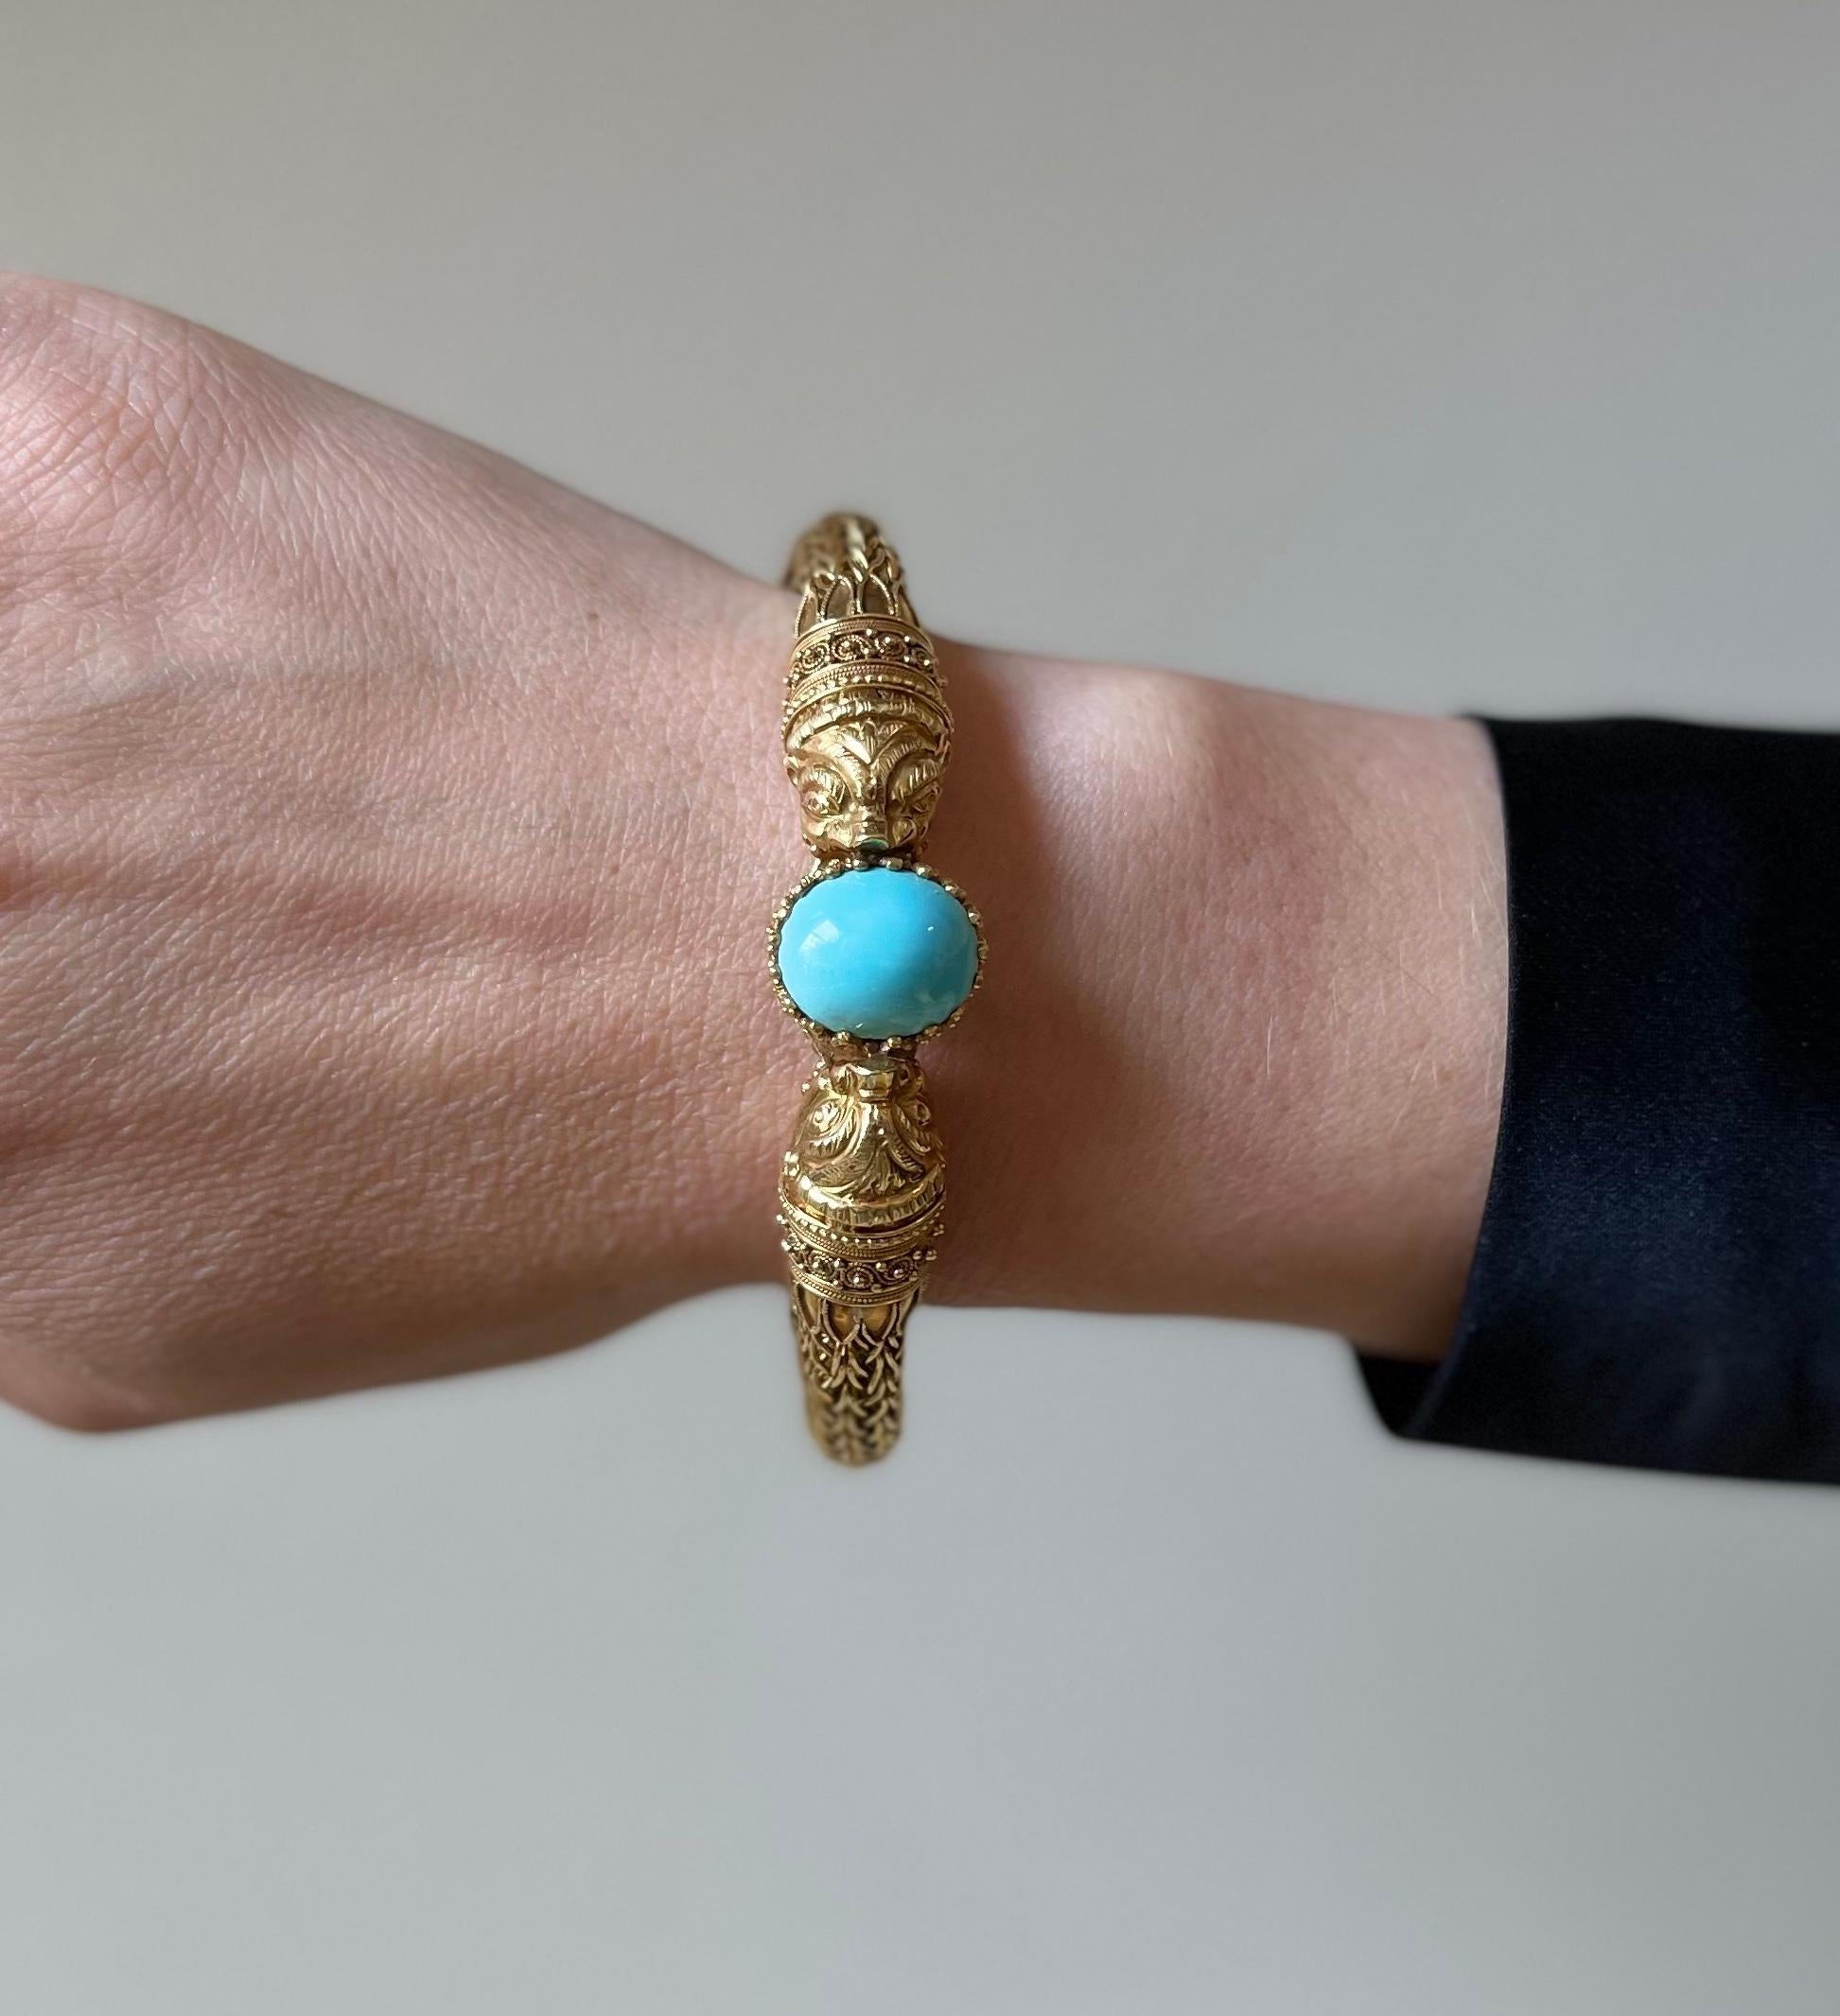 Impressive 18k yellow gold vintage bracelet, depicting chimera heads with a turquoise in the center, measuring 14mm x 12mm. Bracelet will fit an average wrist size 7